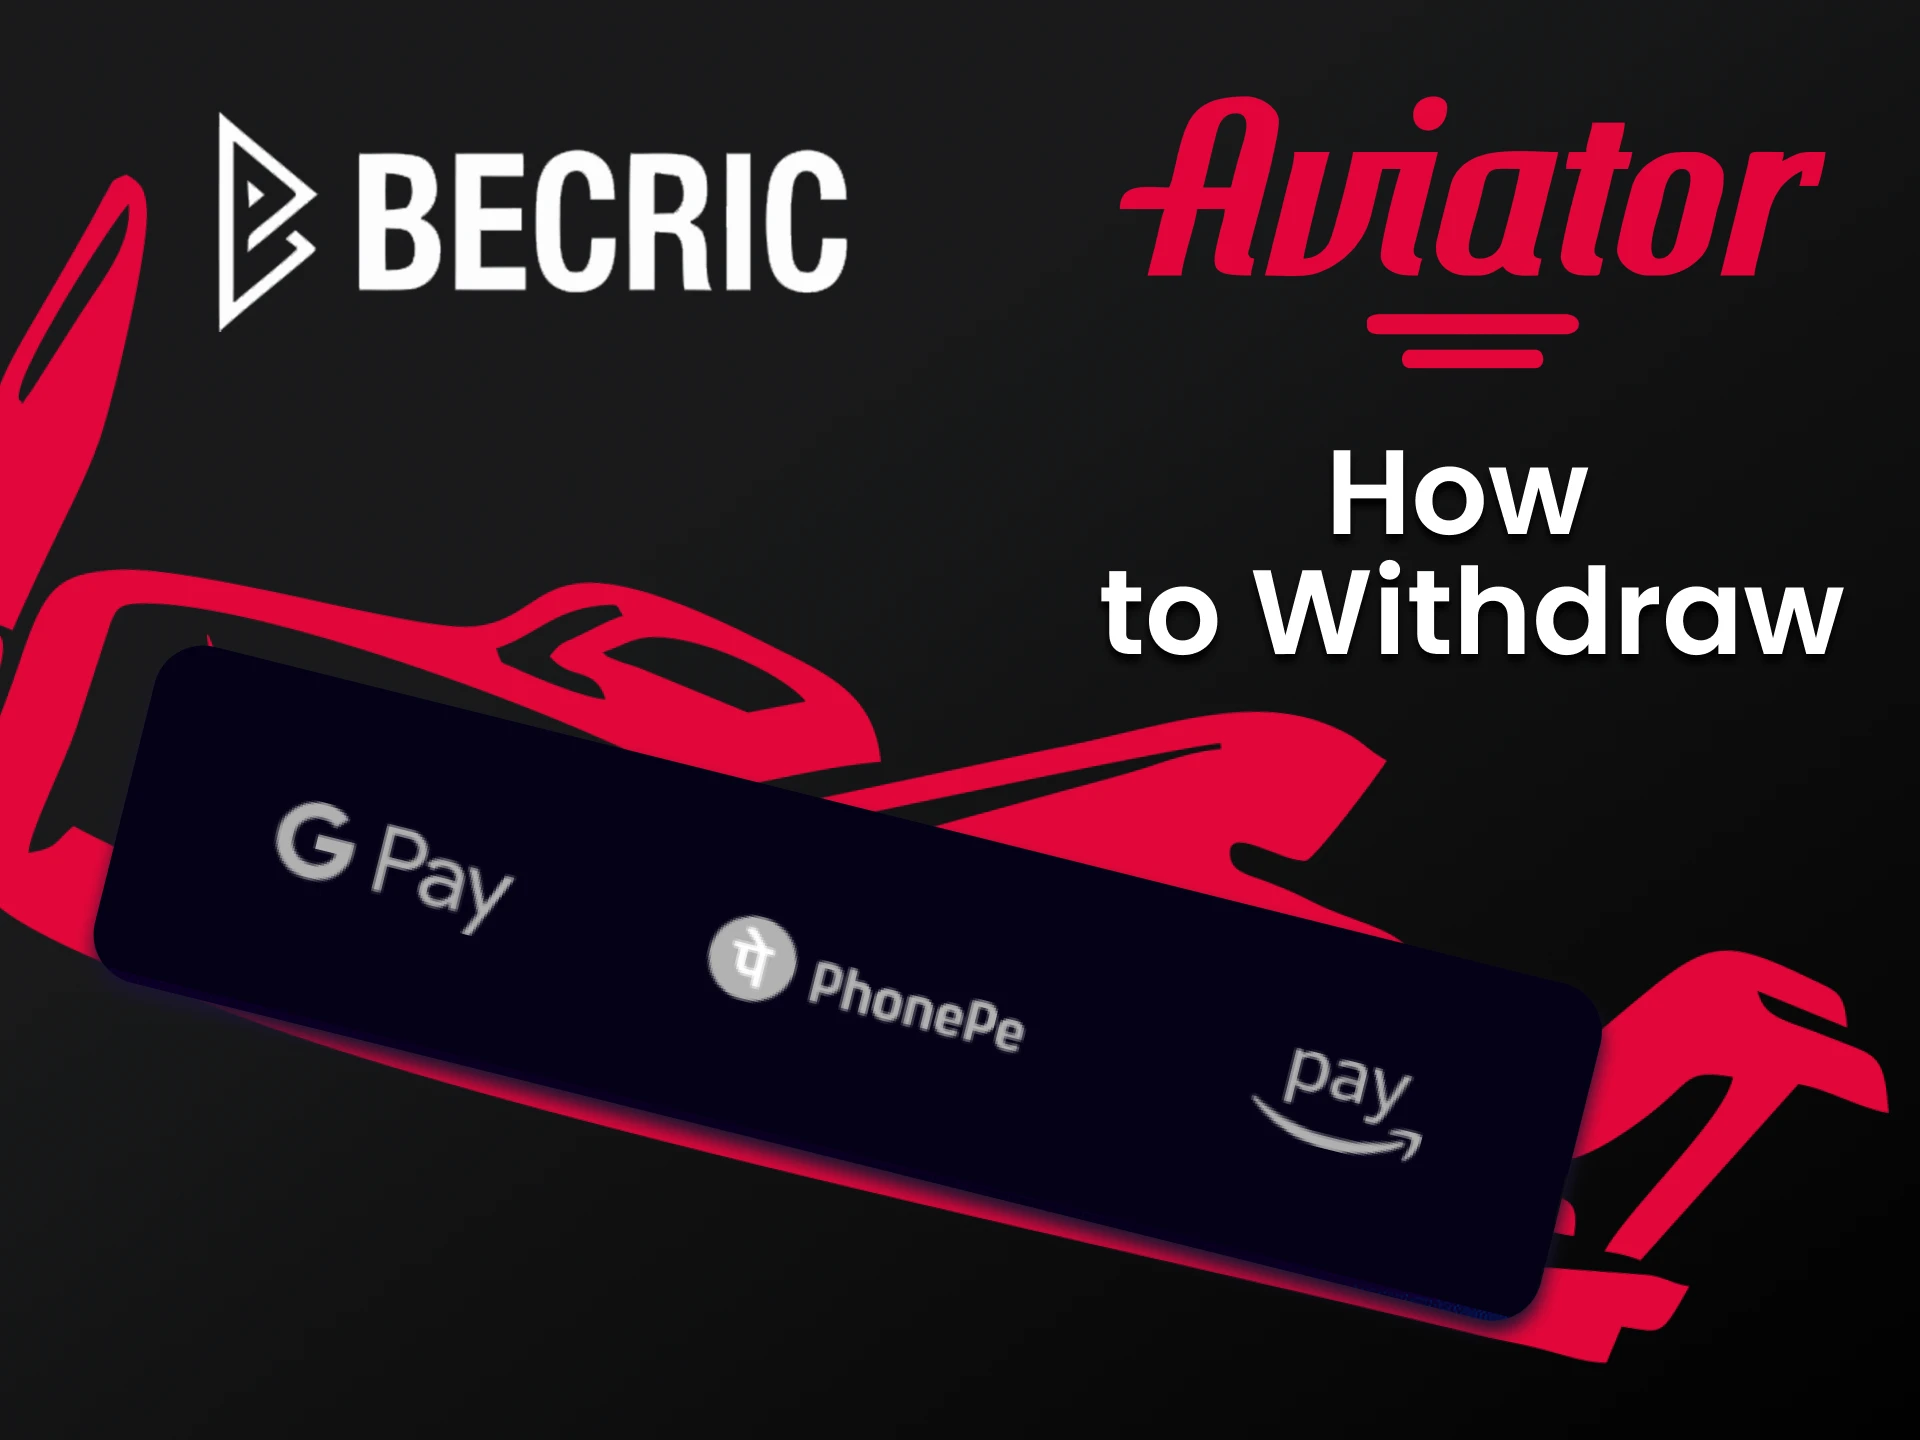 After winning money, you can withdraw it in a convenient way for you from Becric.